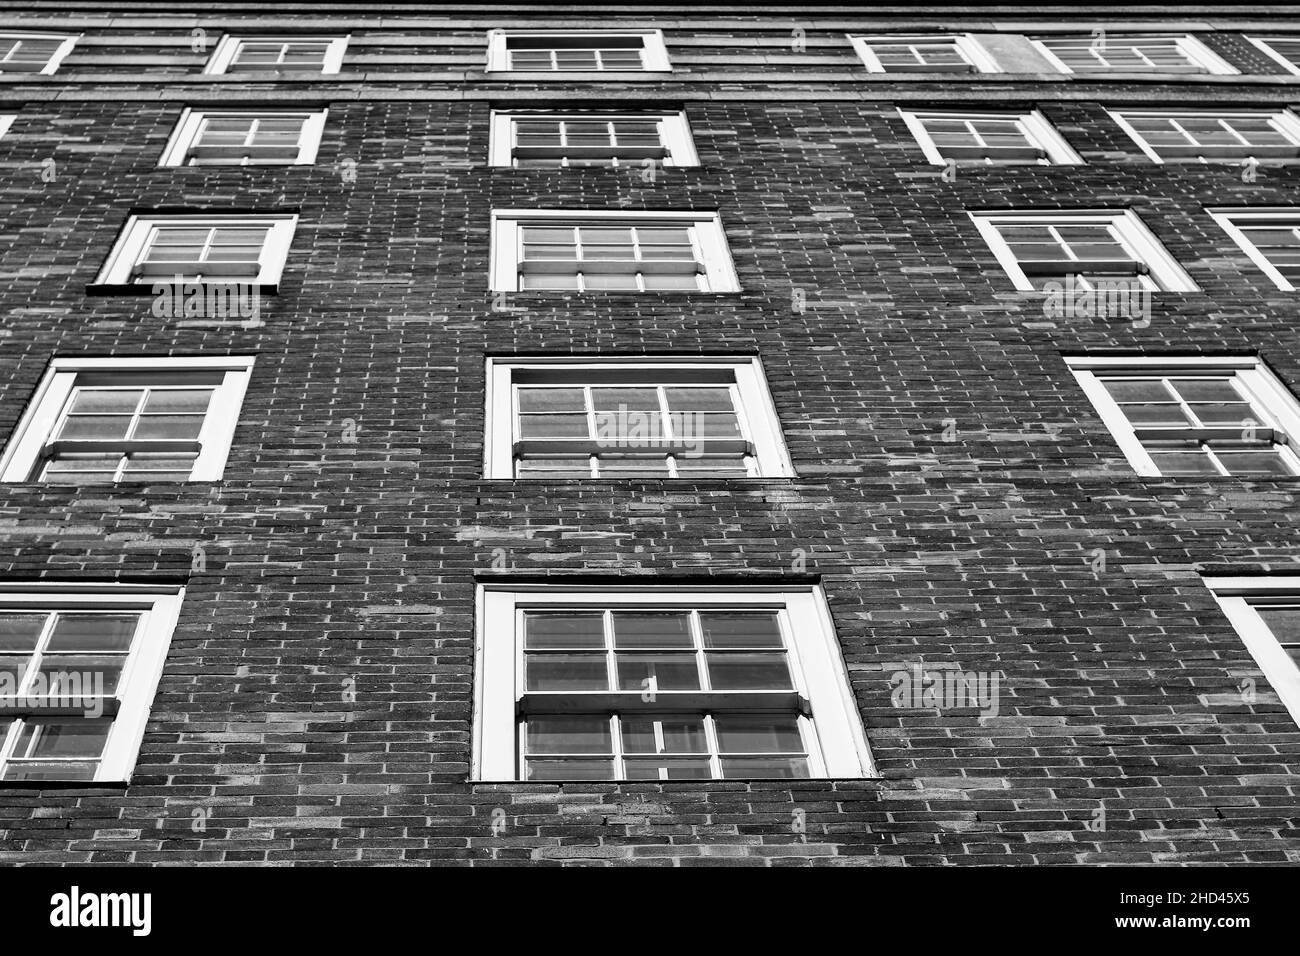 Low angle shot of an architectural building in London, England, grayscale image Stock Photo